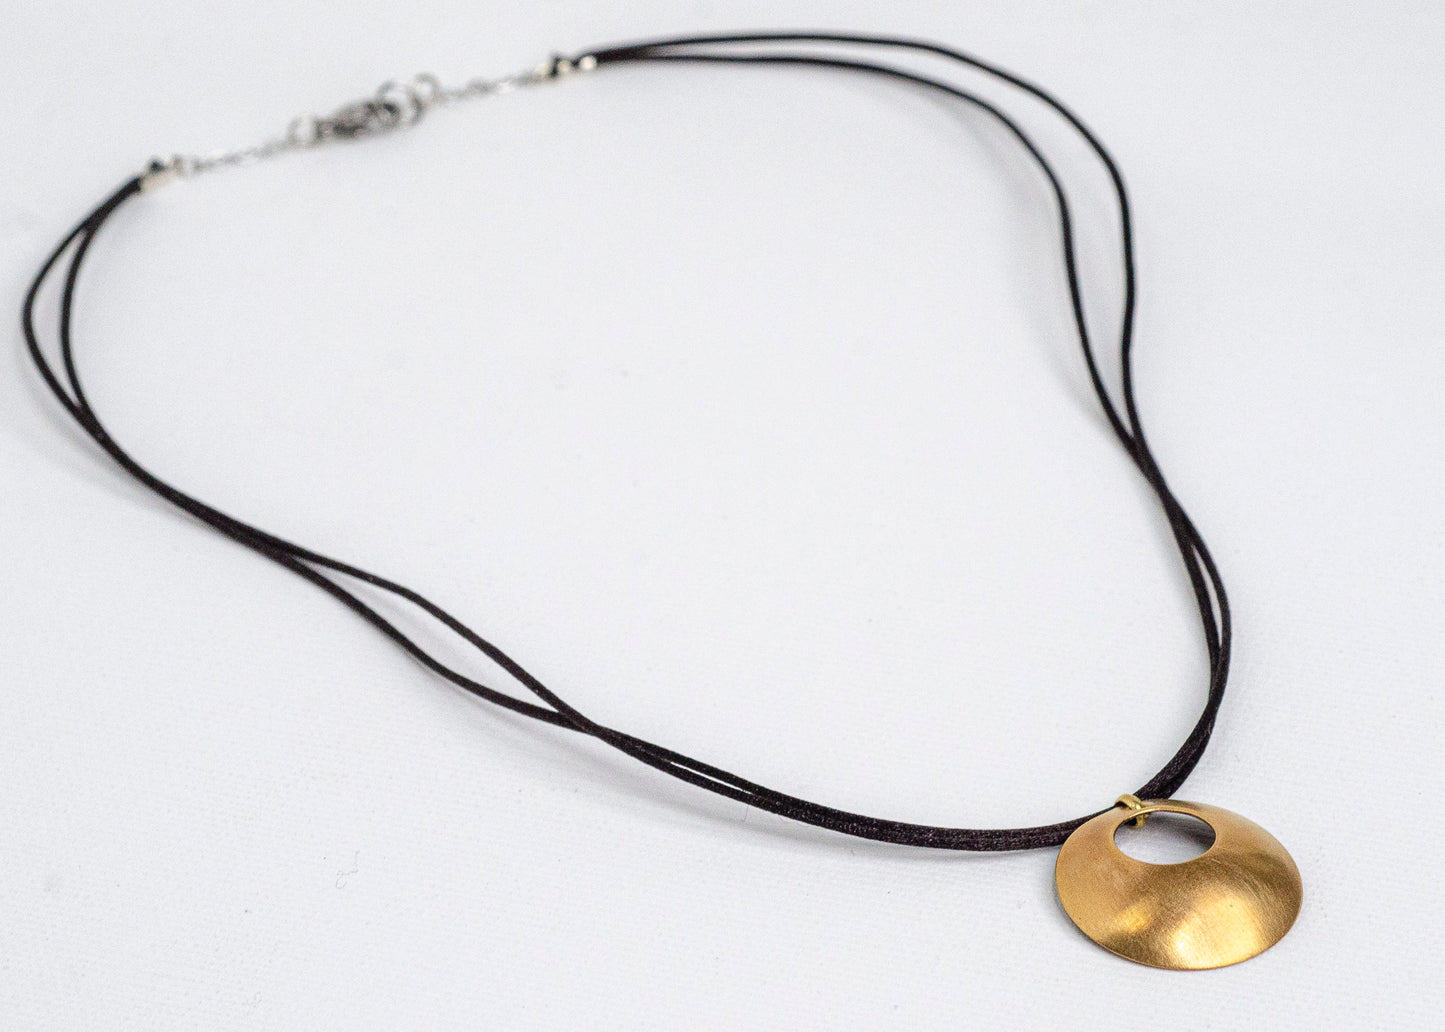 Aperture Necklace Style 1 - Small